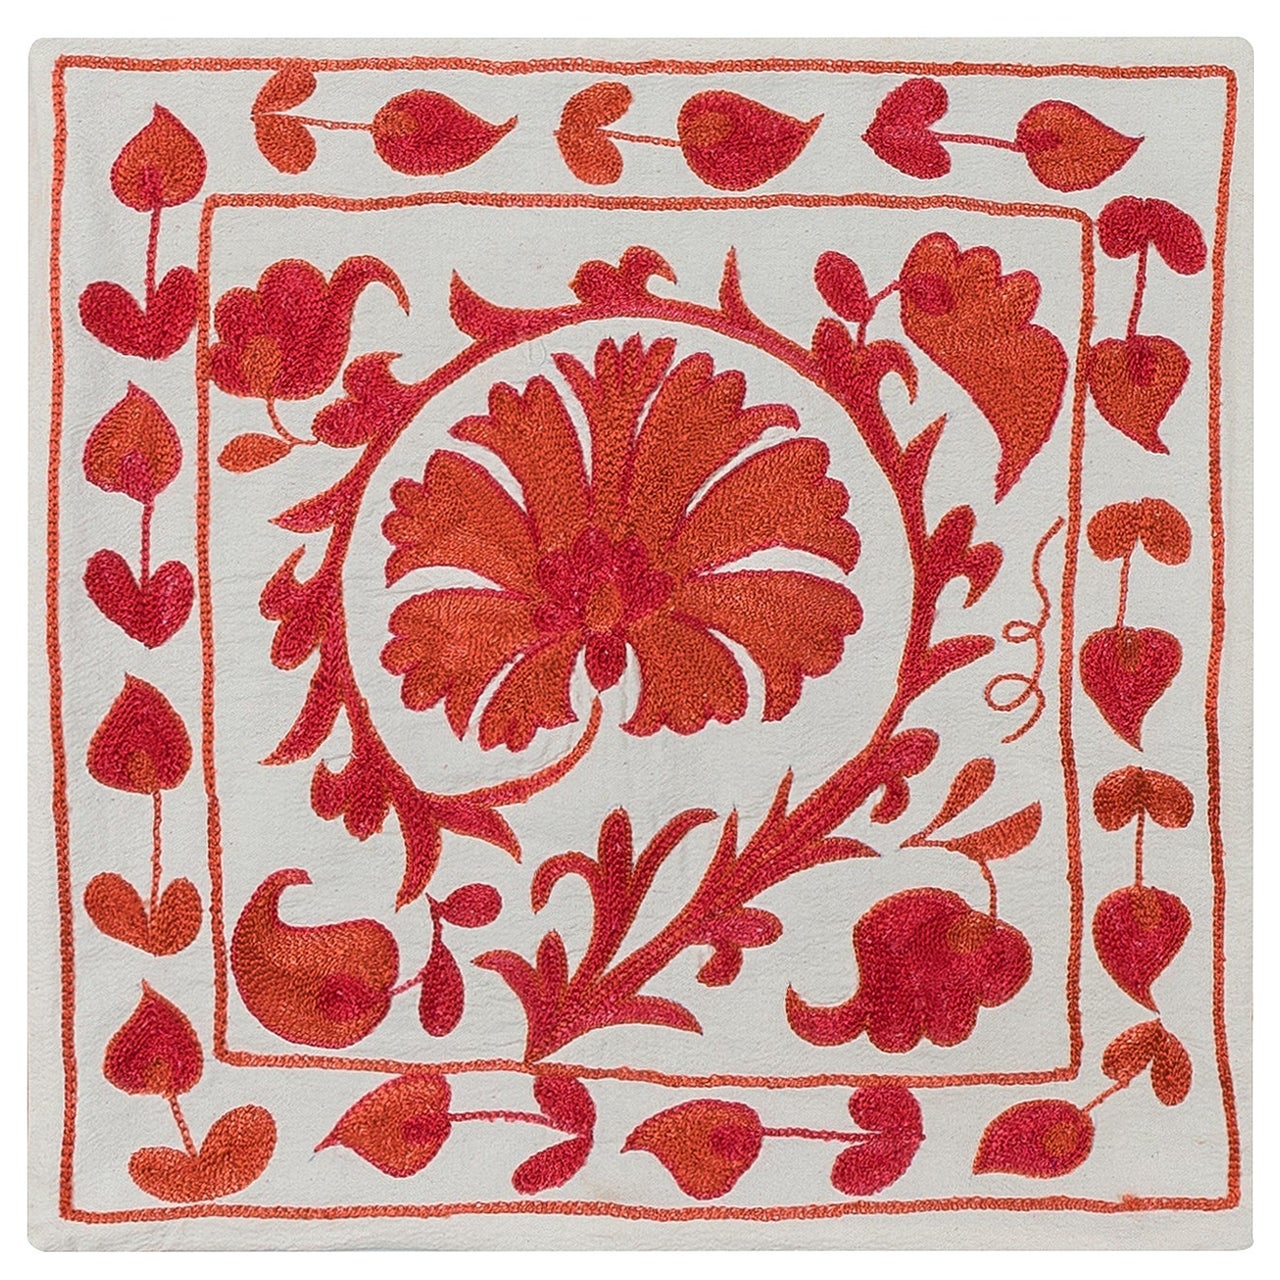 New Silk Hand Embroidery Suzani Textile Cushion Cover in Cream & Red For Sale